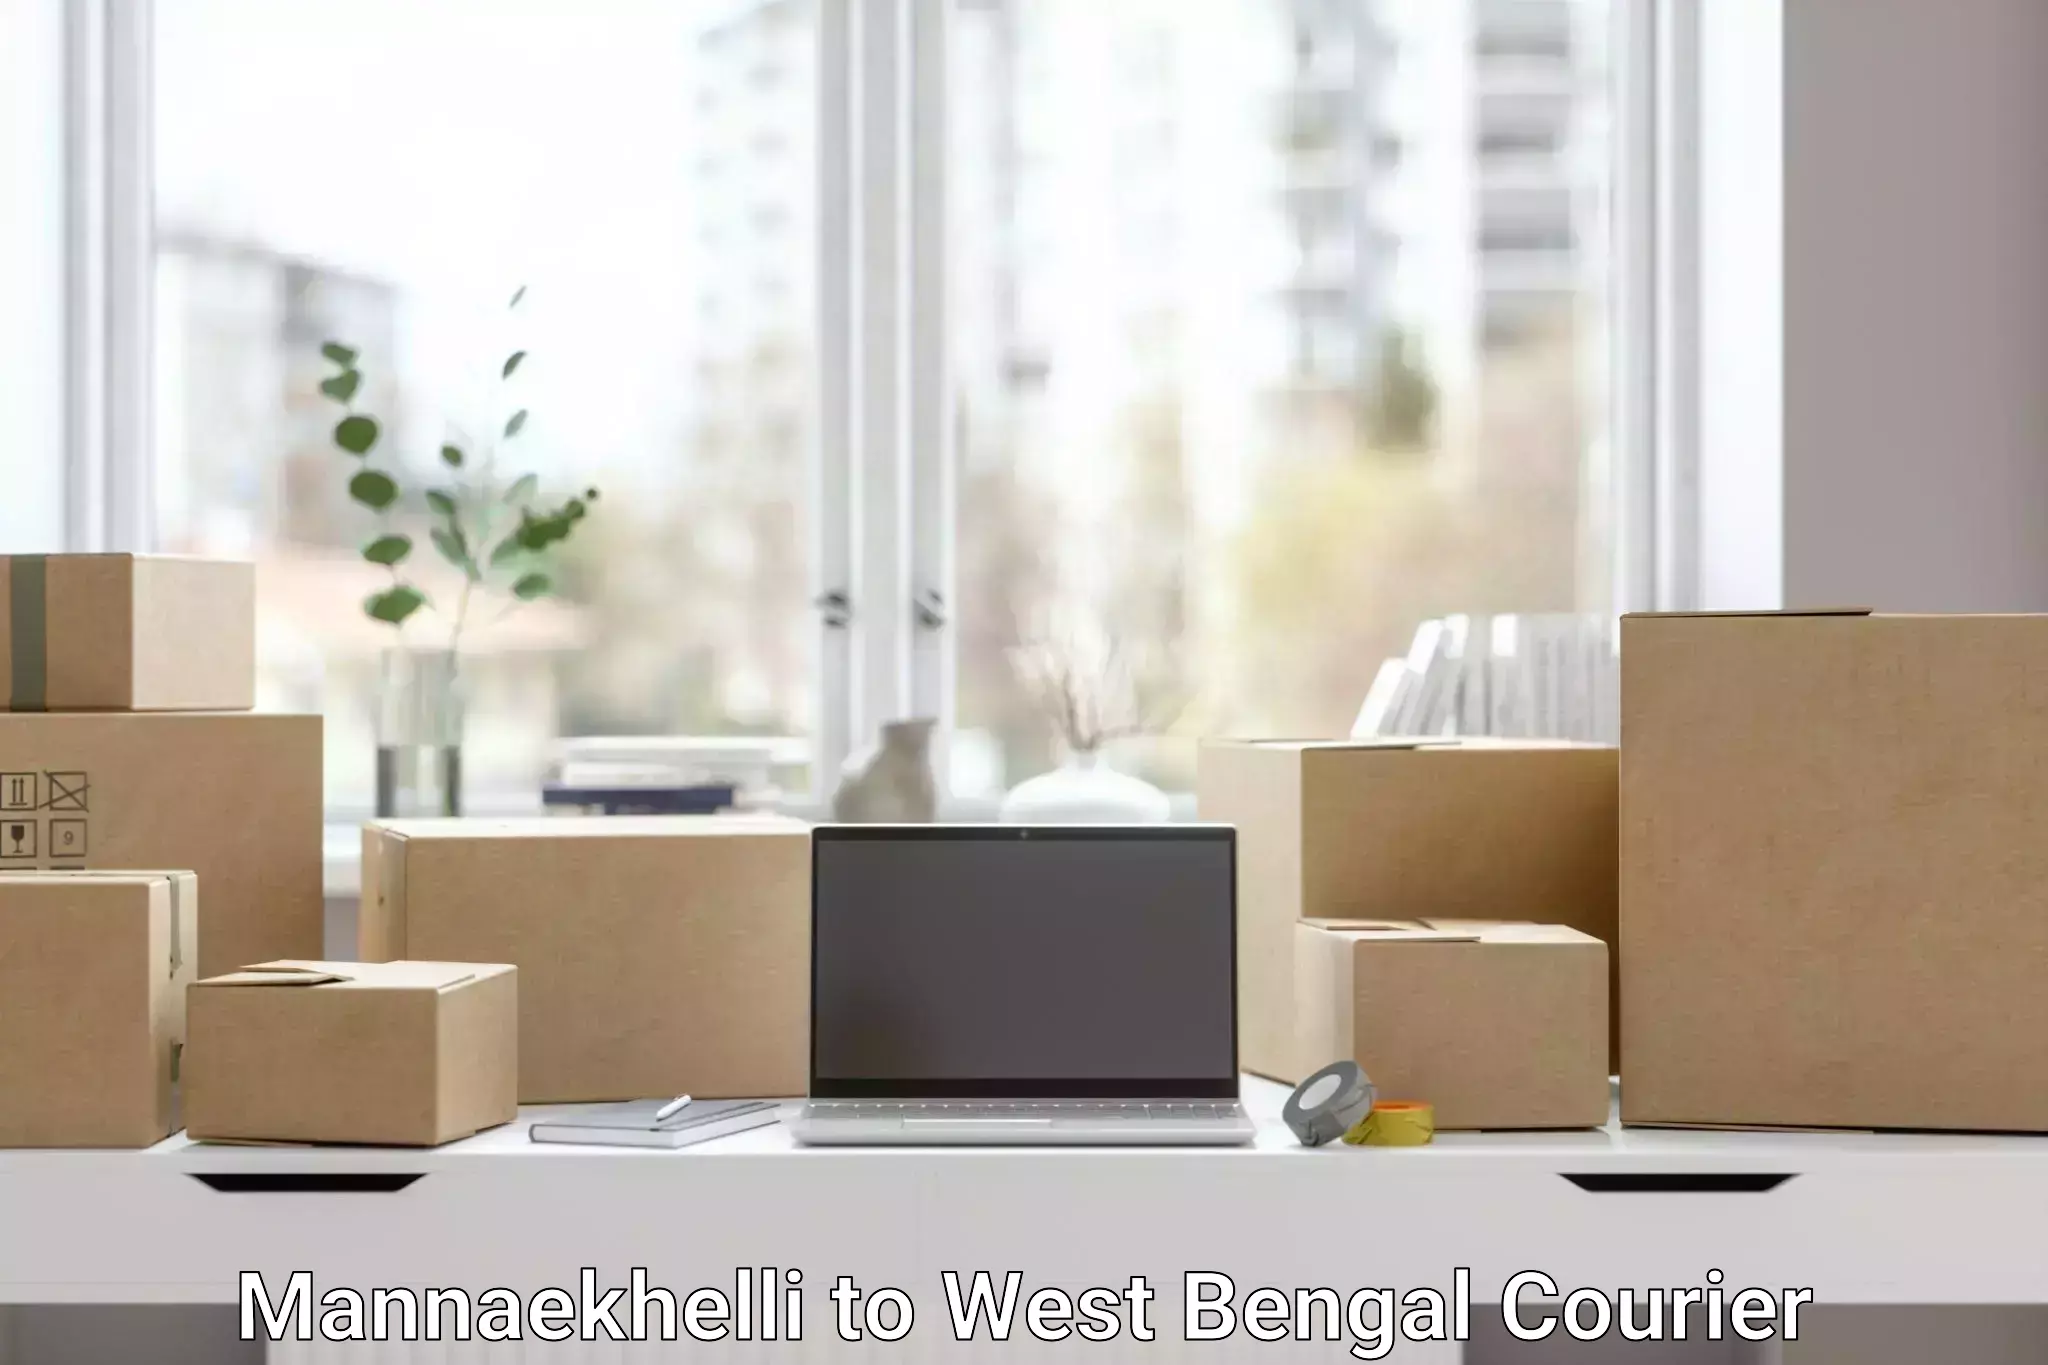 Express mail solutions Mannaekhelli to West Bengal